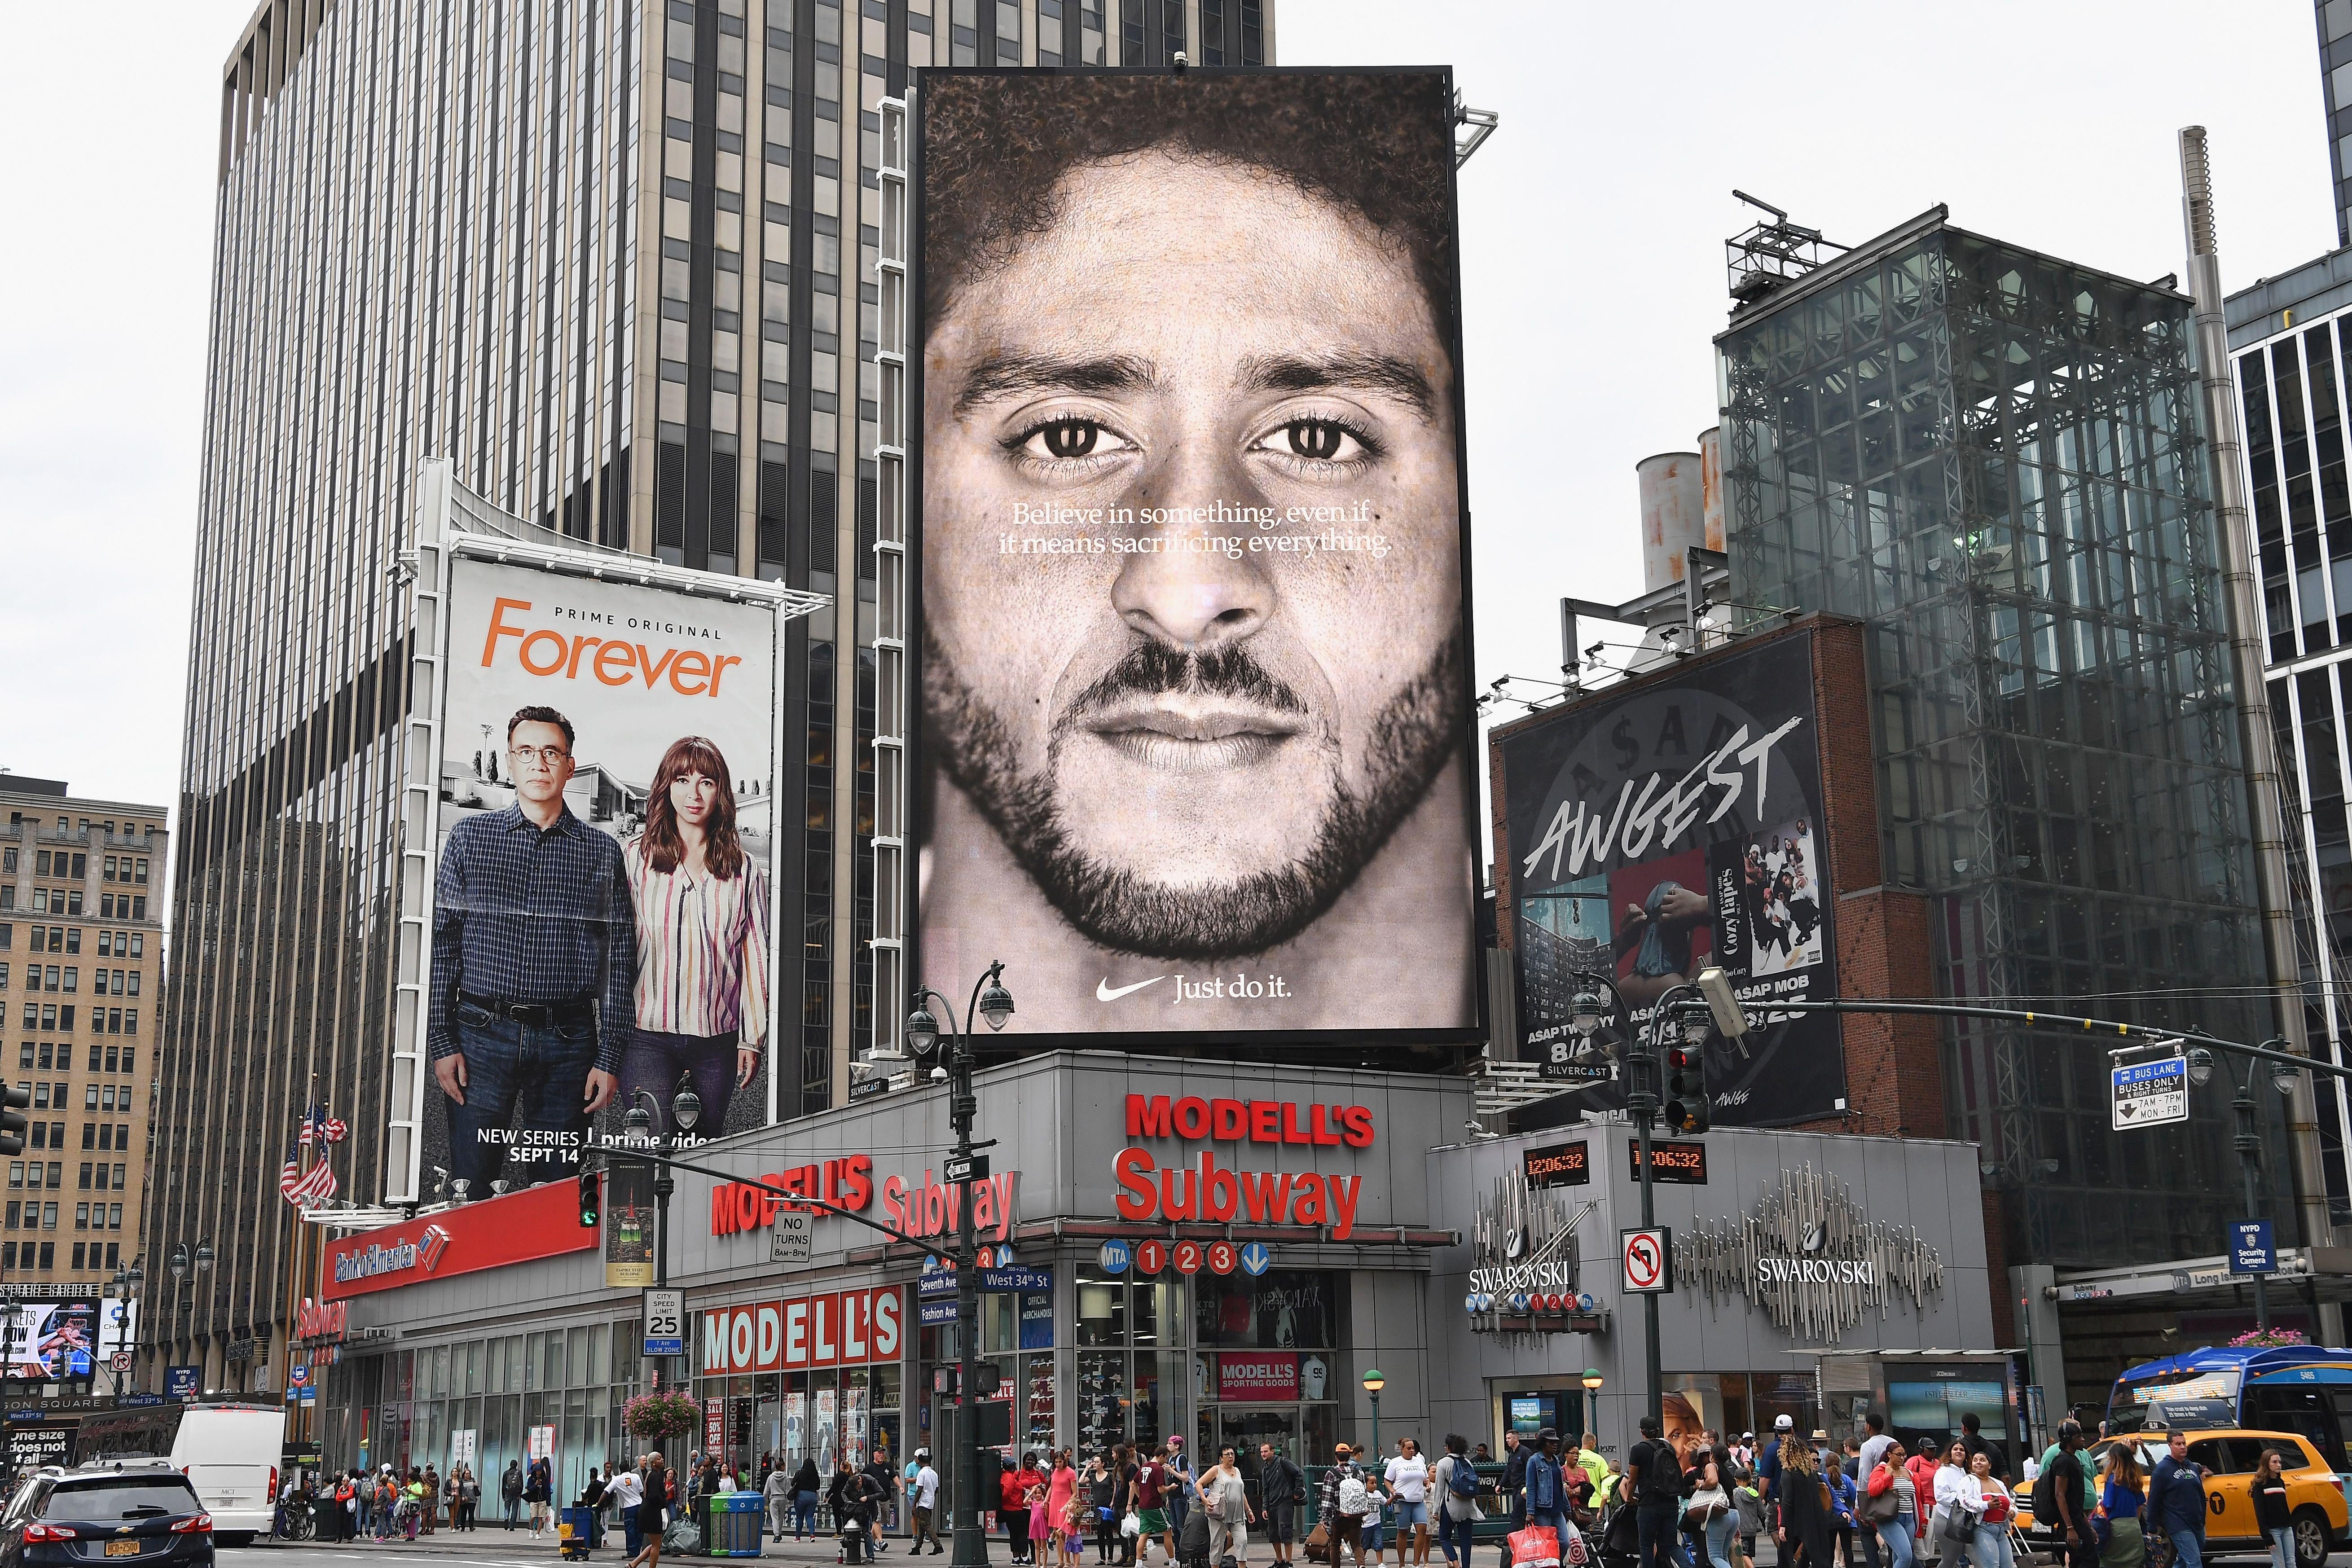 A Nike Ad showing Kaepernick's face stands above a New York City street corner.